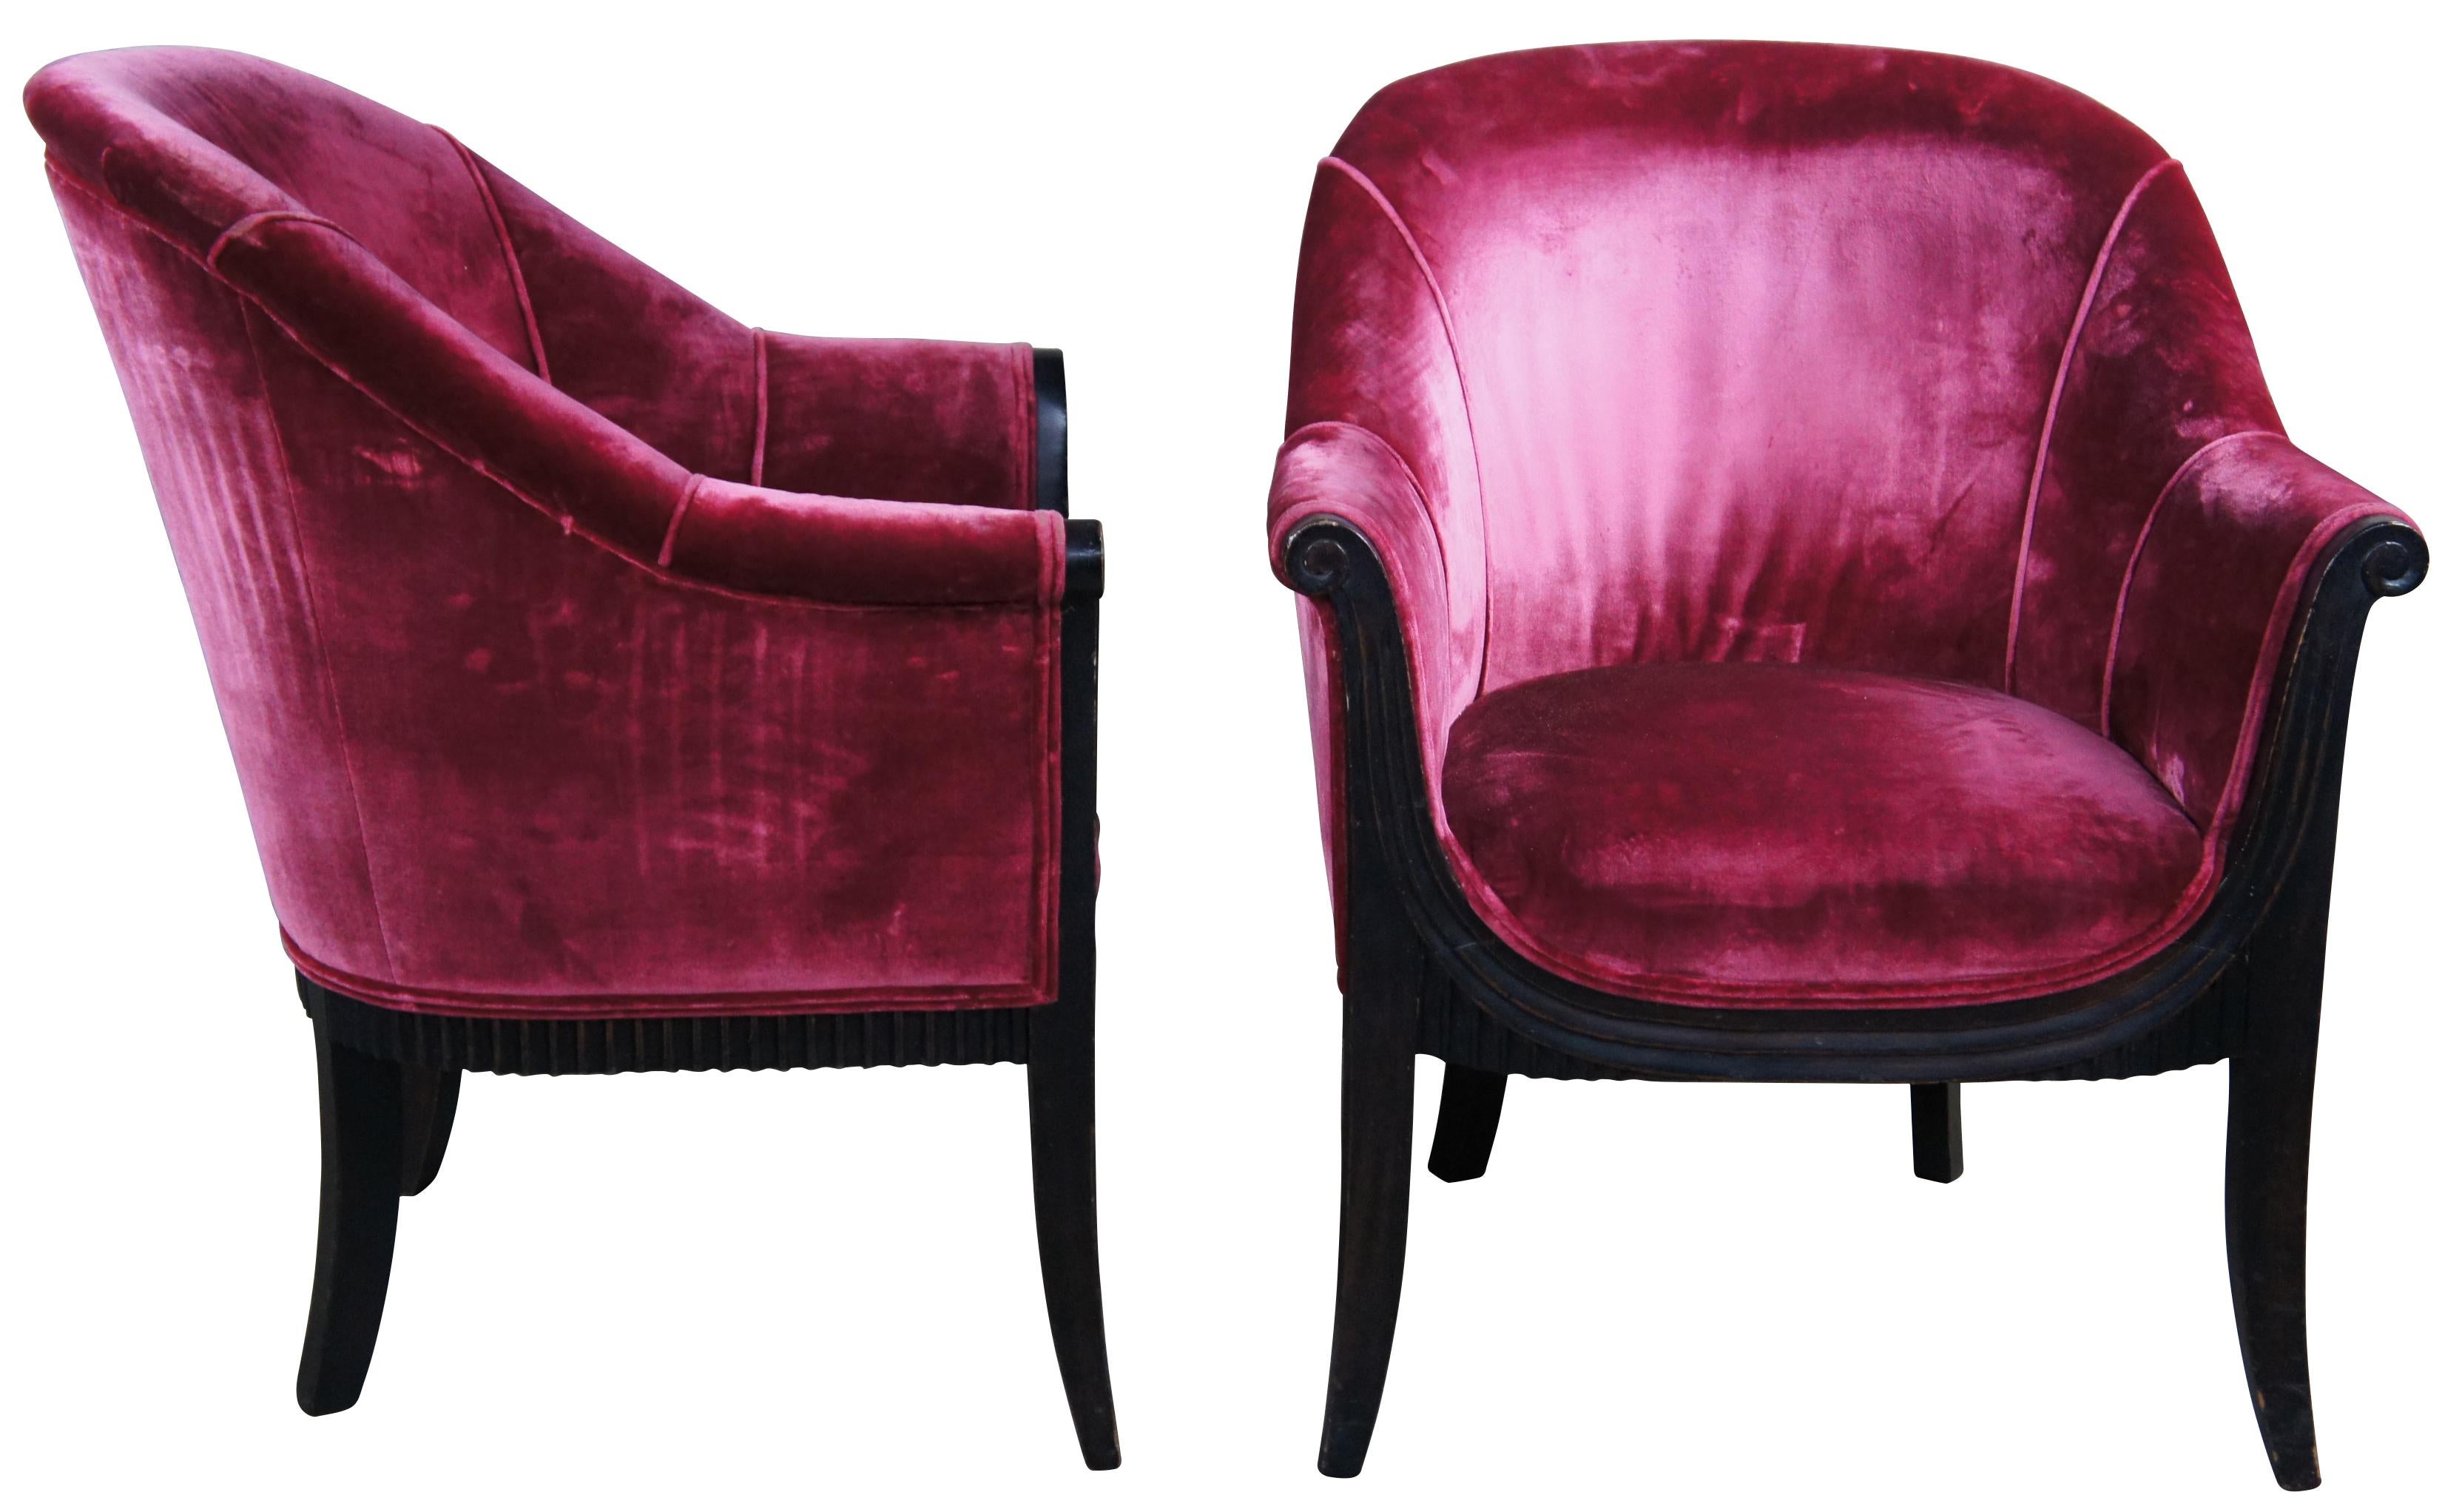 Pair of late Art Deco arm chairs. Made from mahogany with an ebonized frame featuring flared and scrolled arms, pink velvet fabric and a ribbed apron. A nice compliment to your library or living space. Measure: 36